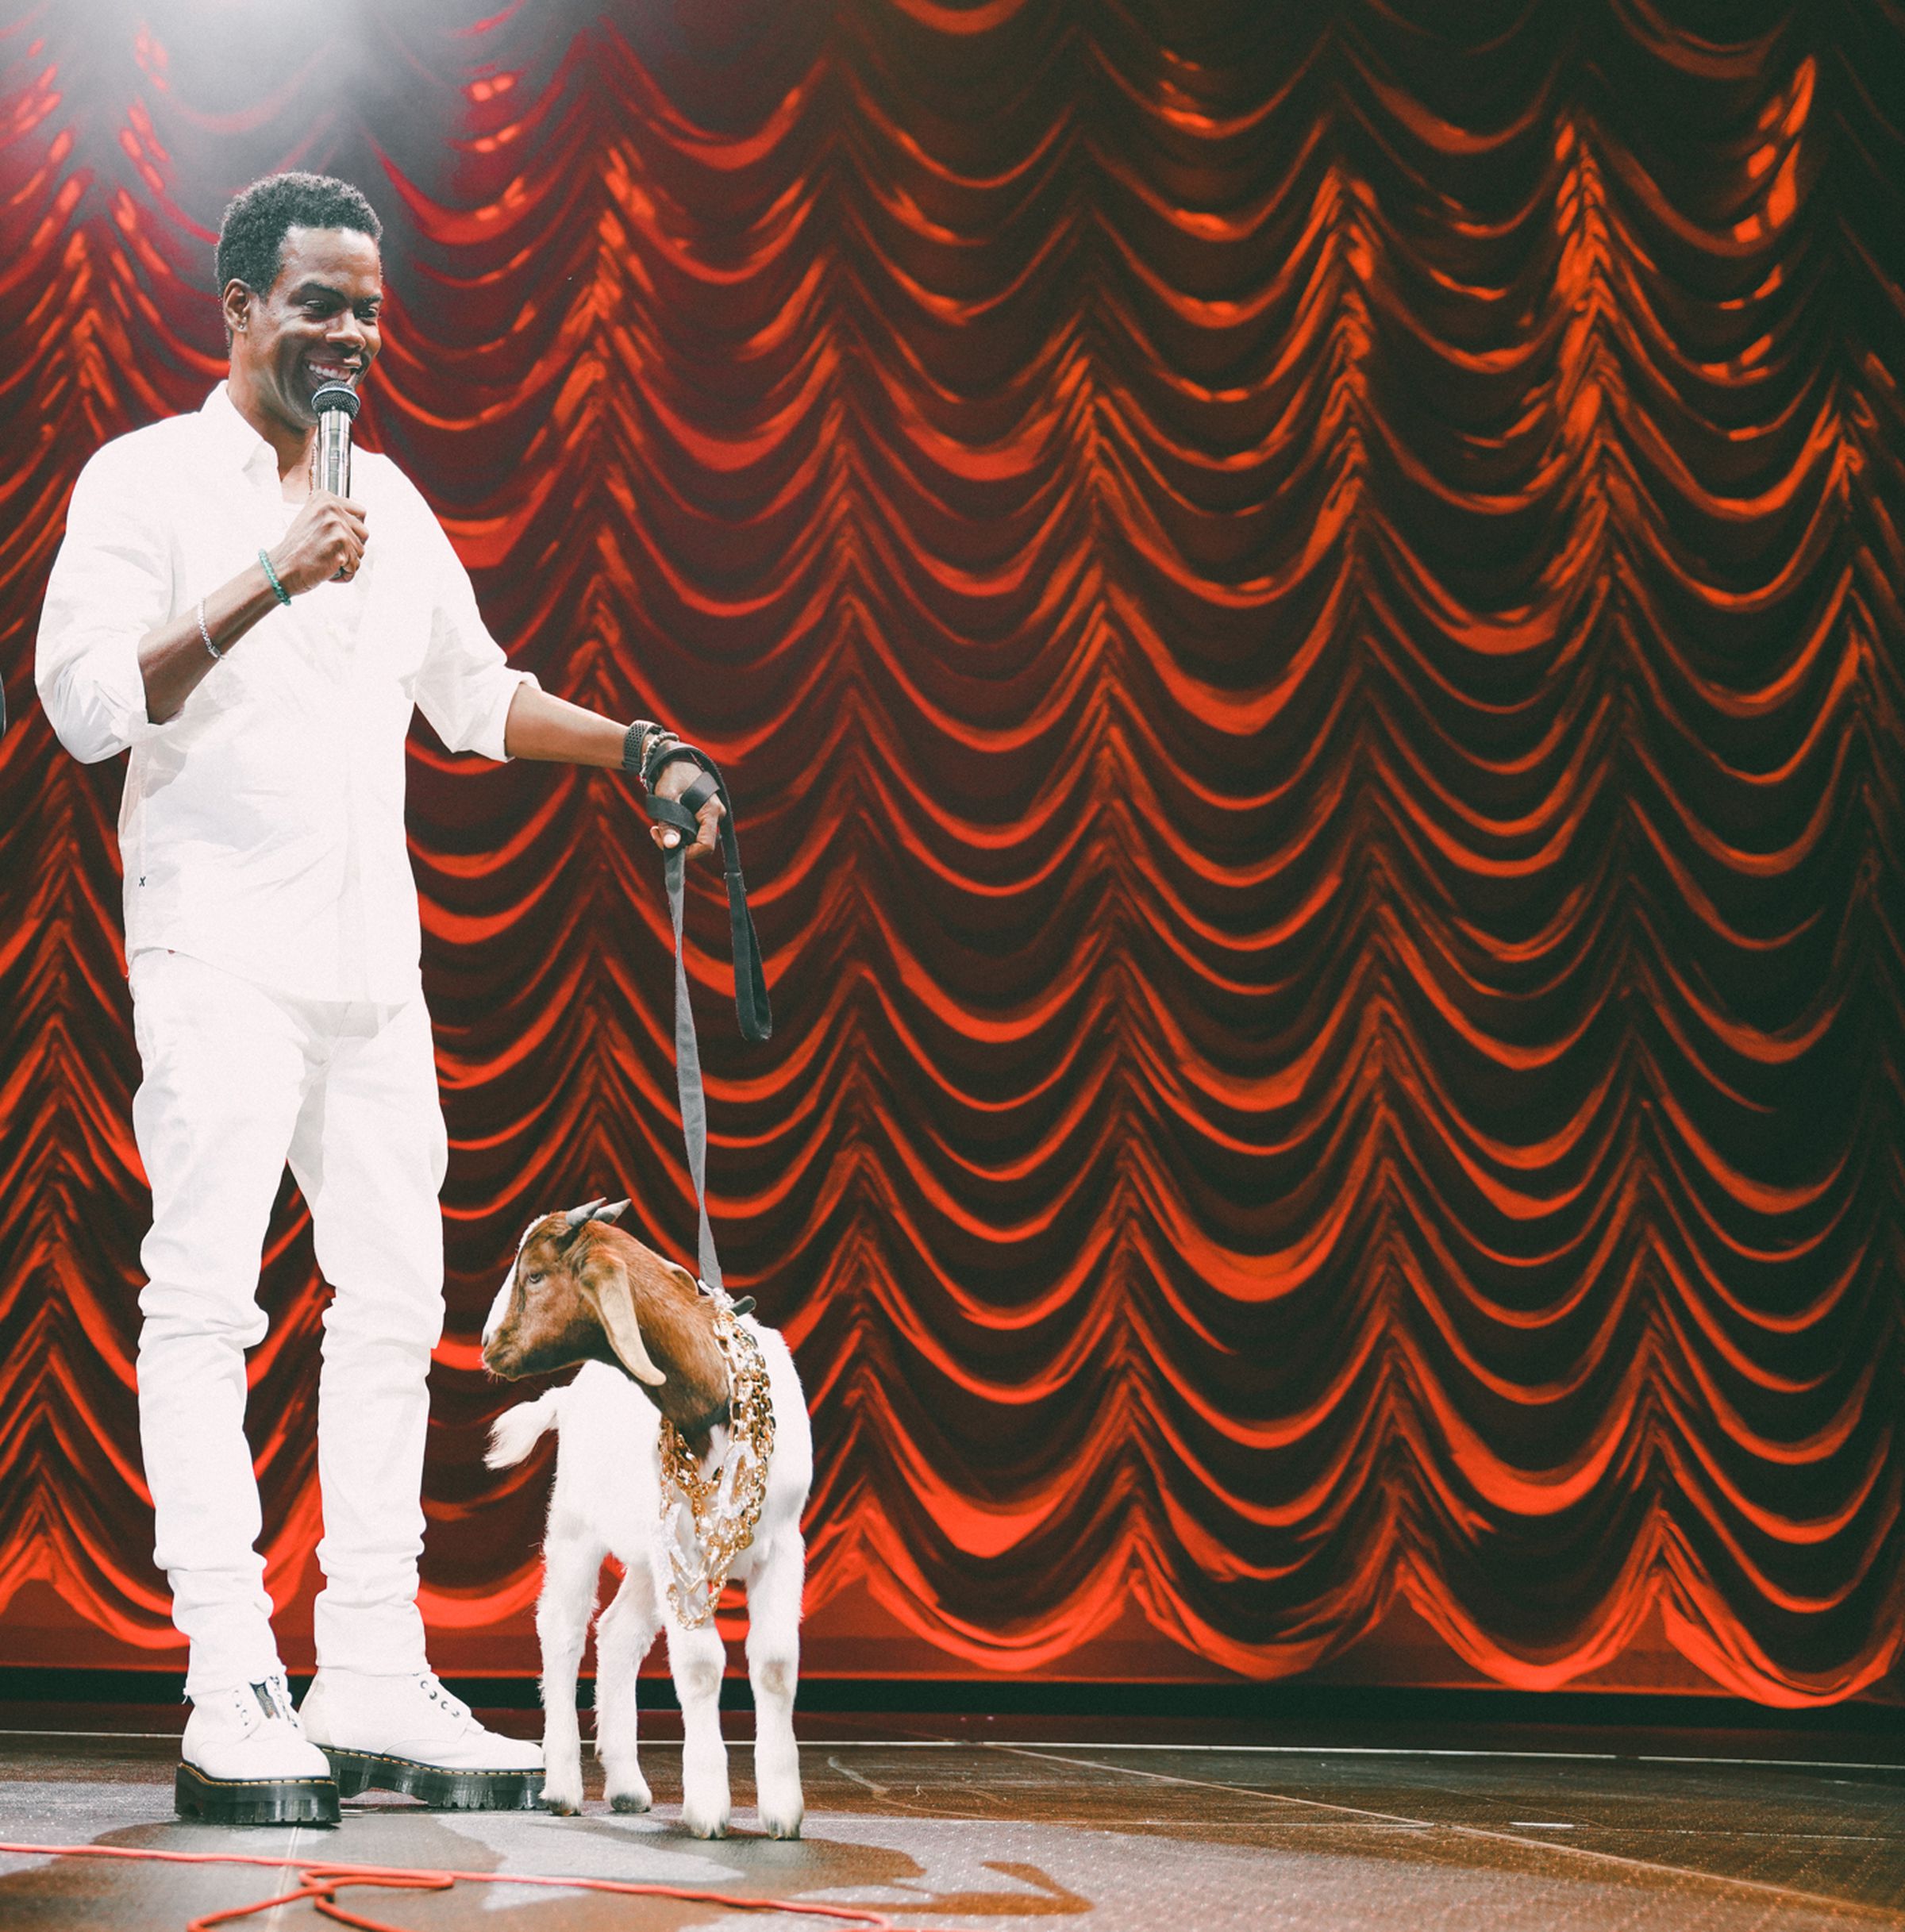 Chris Rock shown performing comedy on a stage with a donkey.